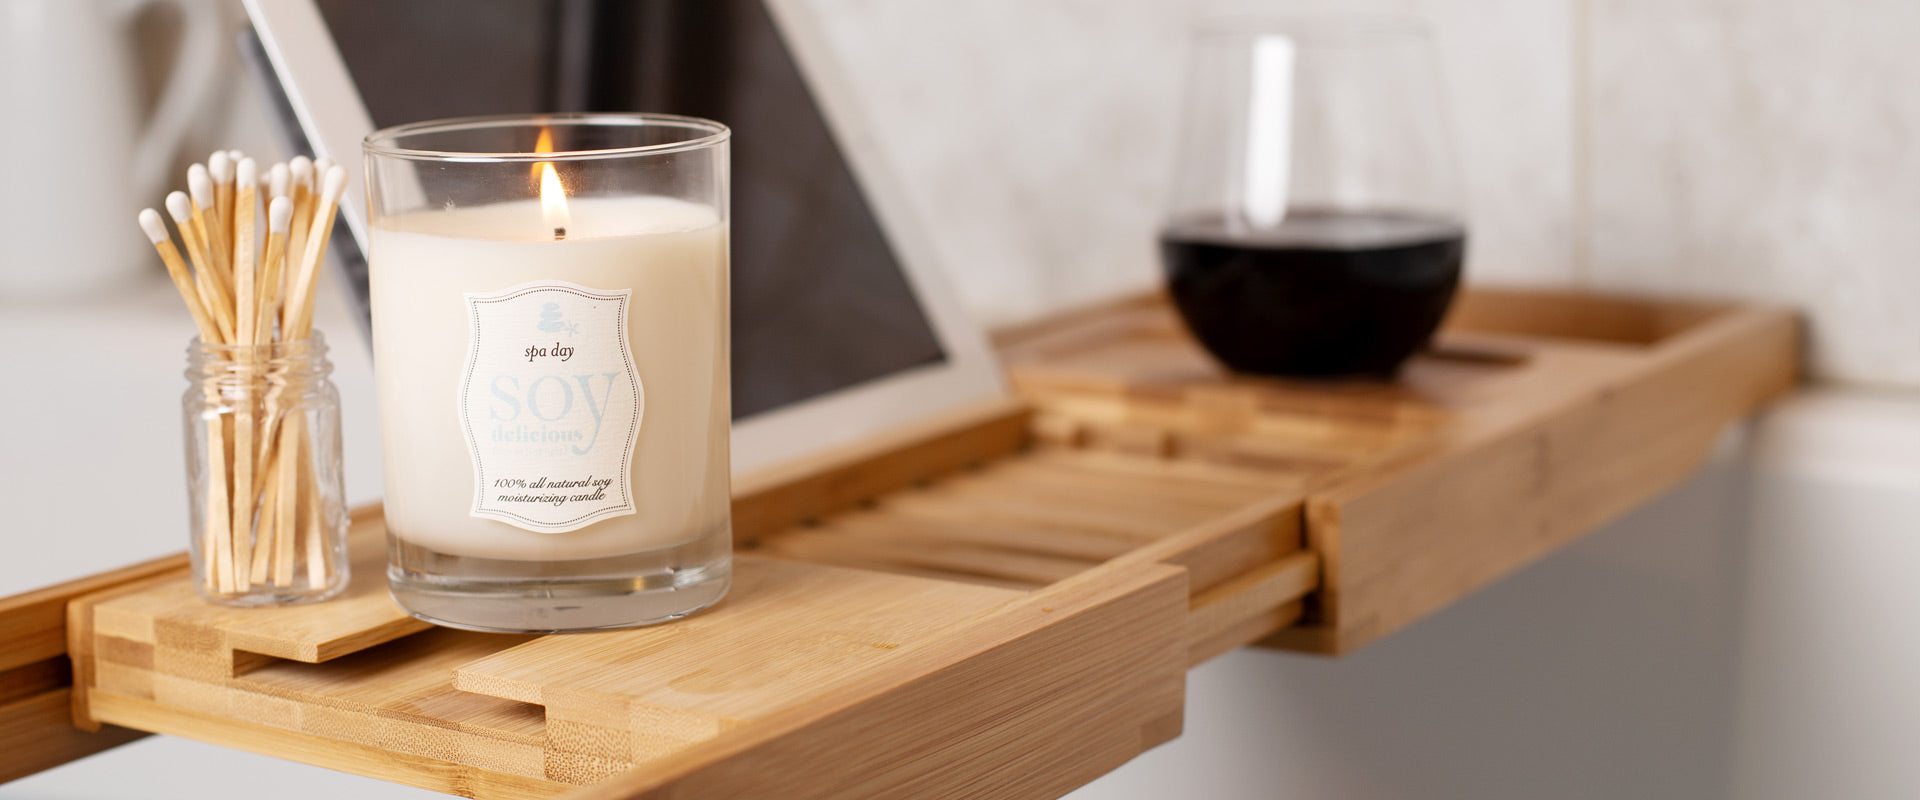 Why Environmentally Friendly Ingredients Make the Best Candles